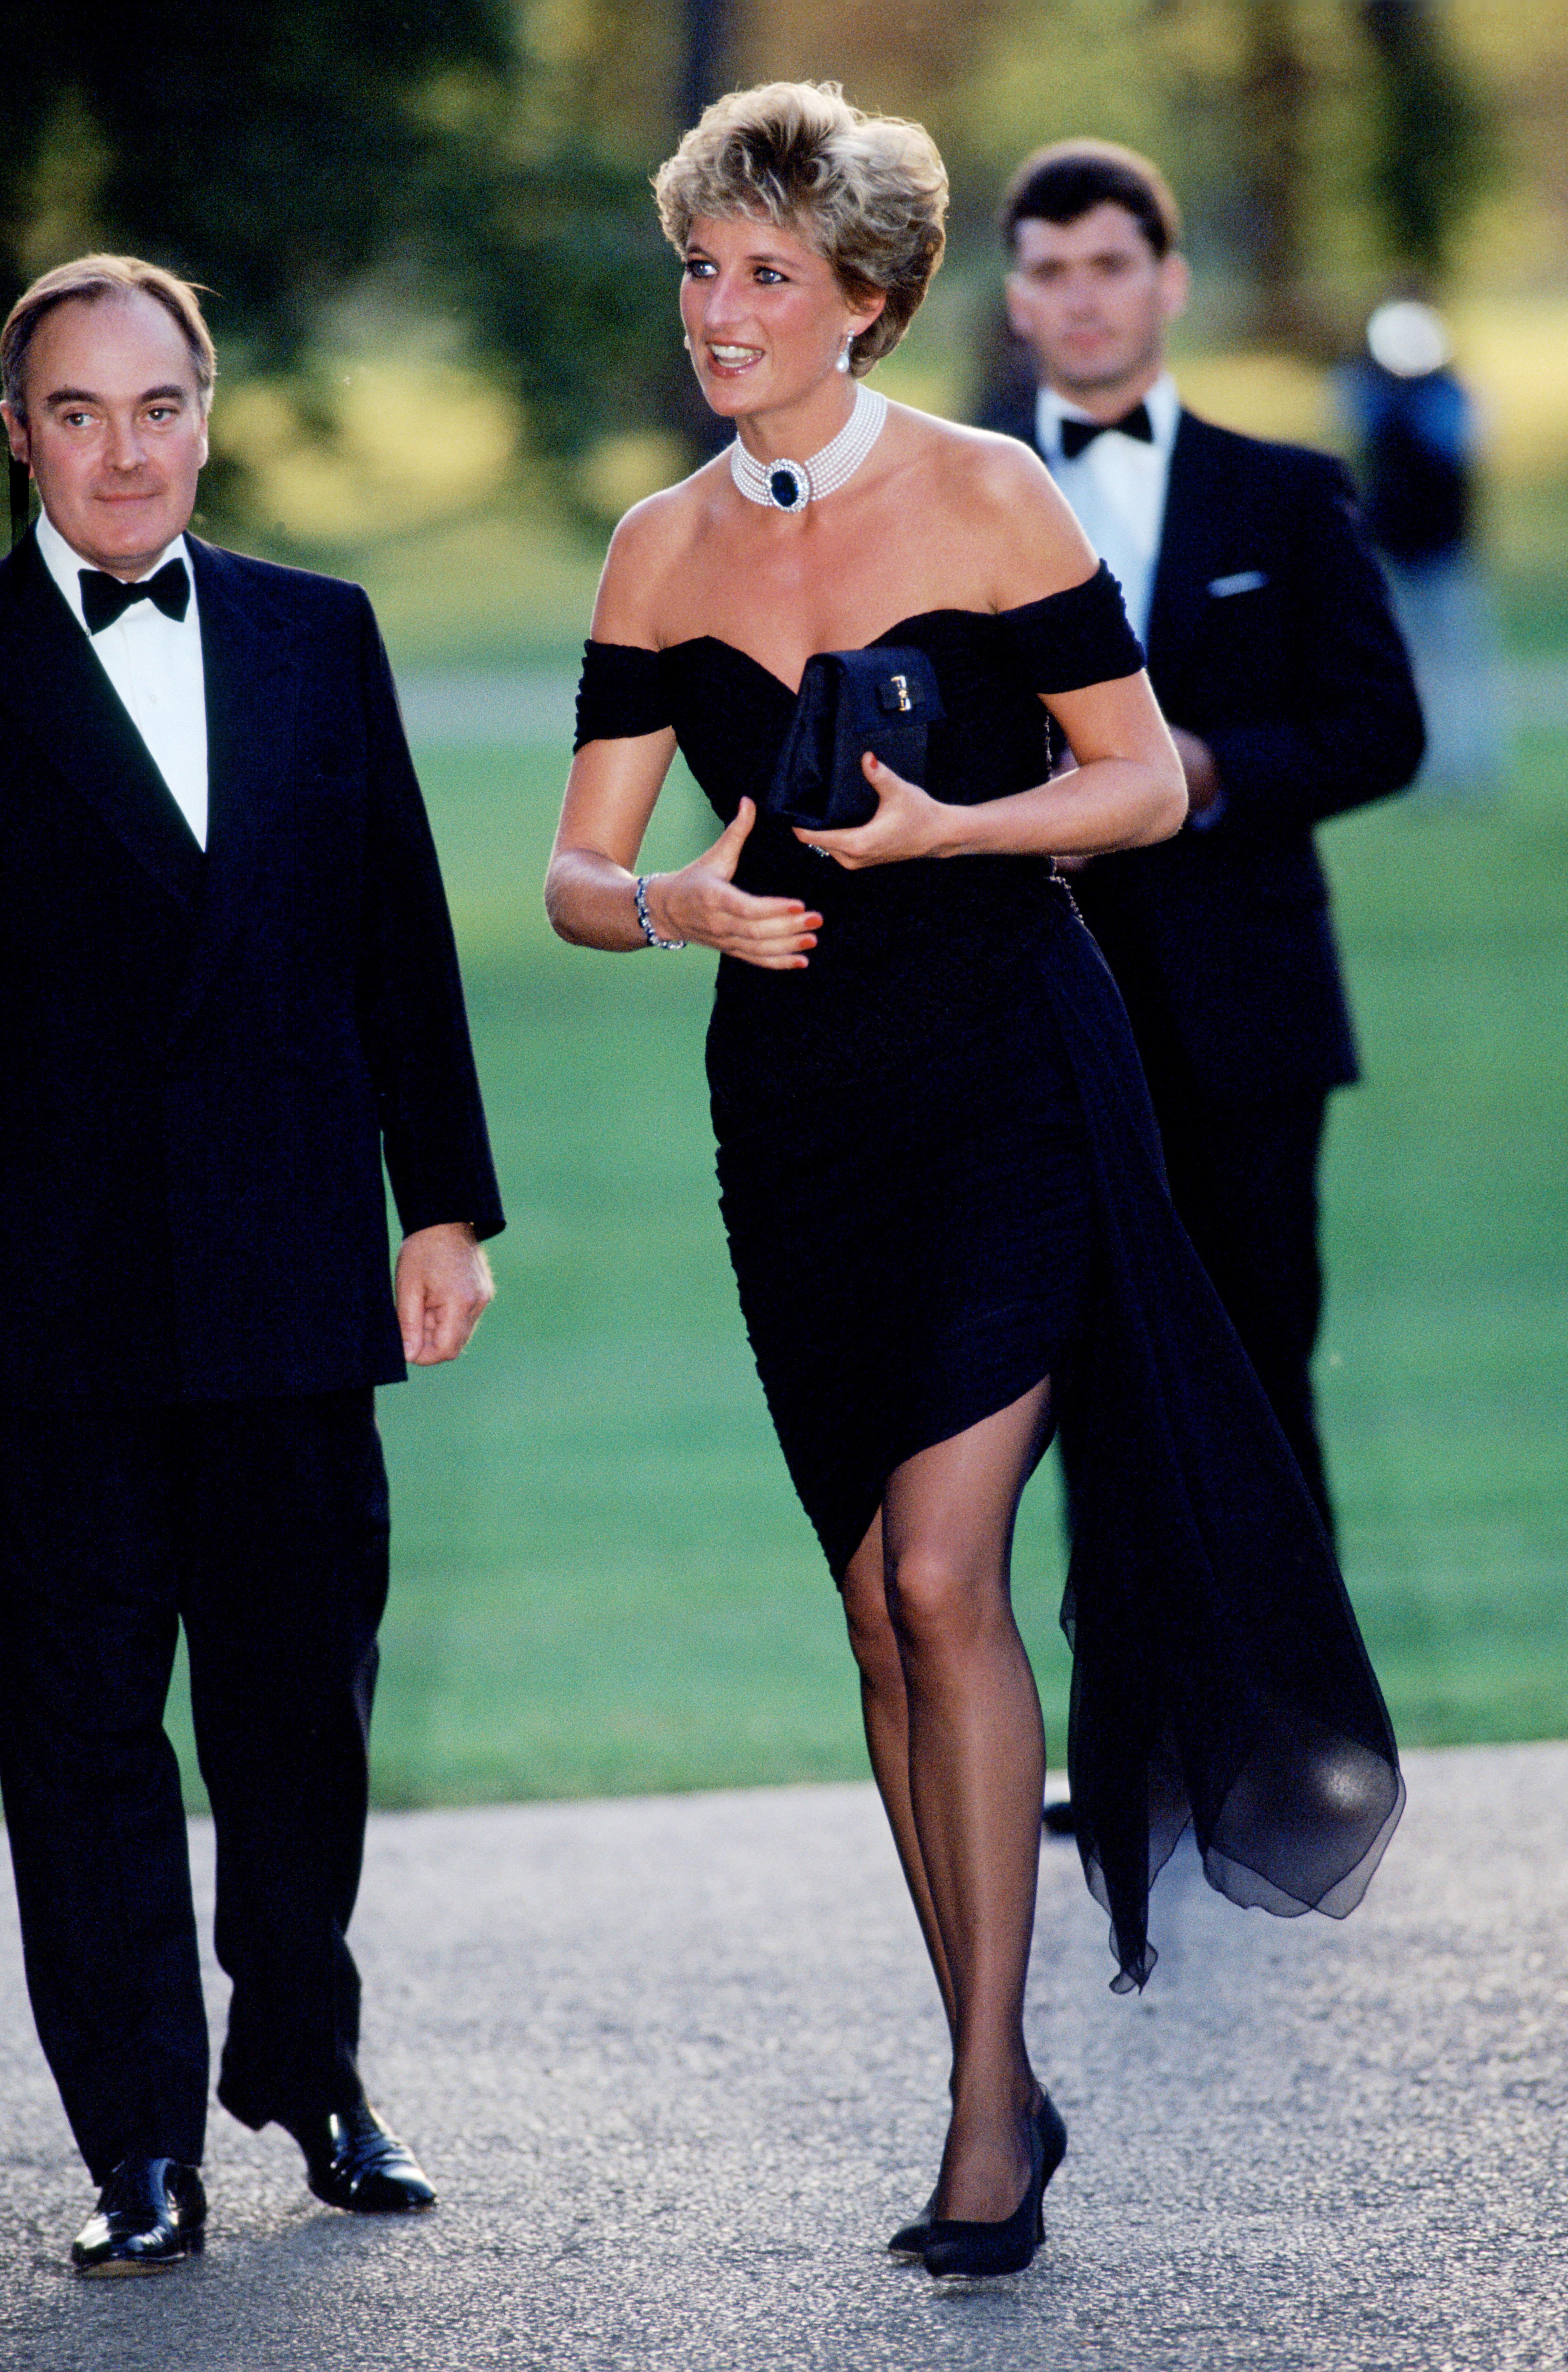 Princess Diana in the revenge dress on June 29, 1994, in London | Source: Getty Images